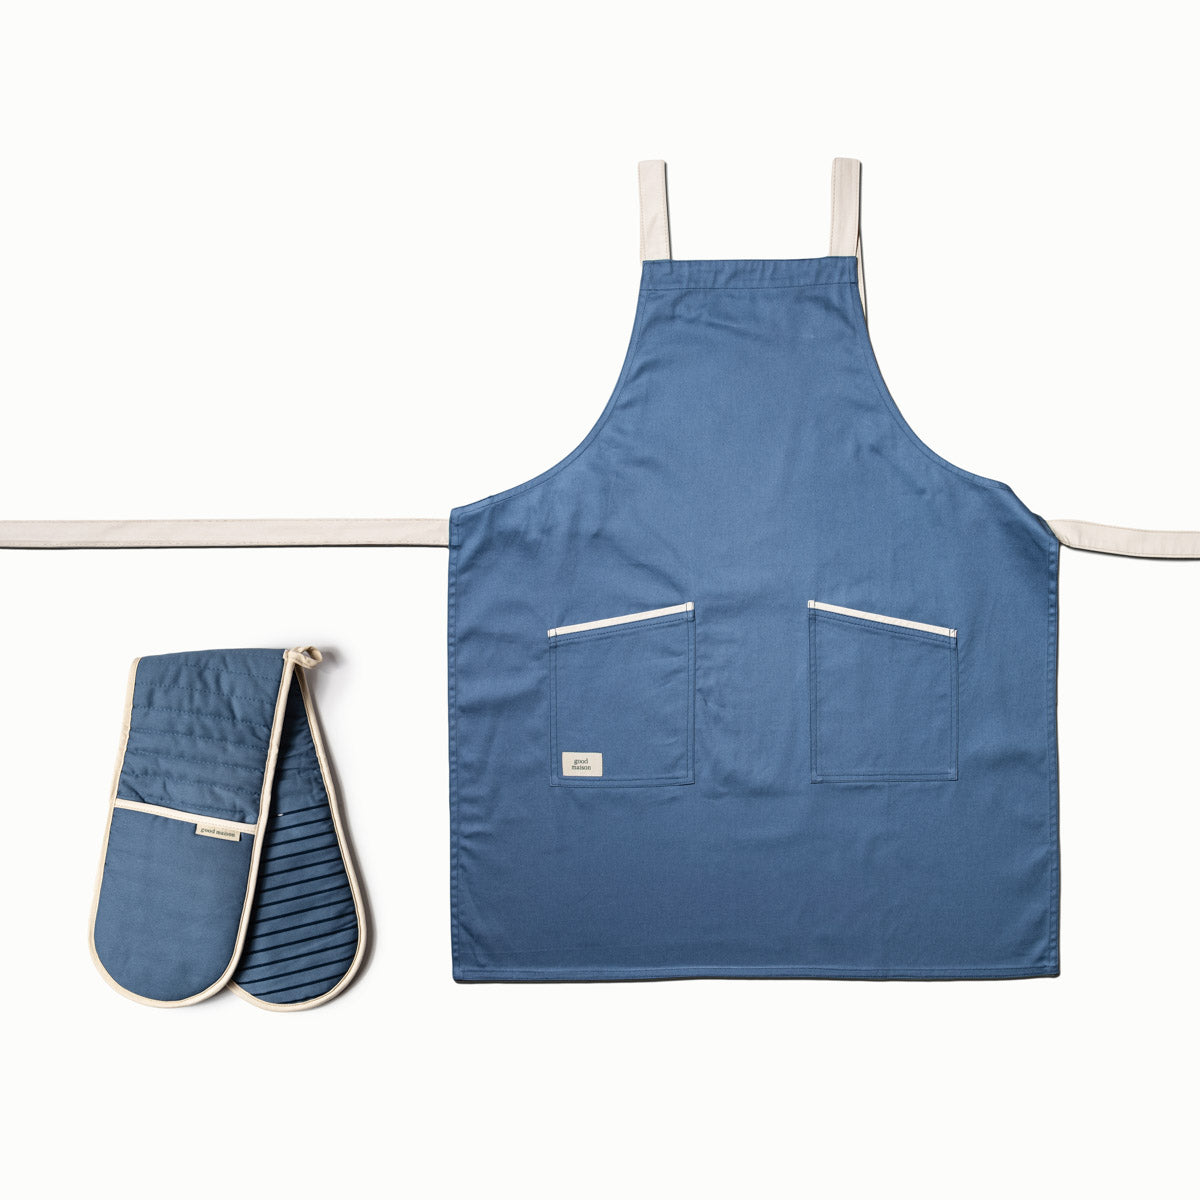 The Apron-Mitten Duo